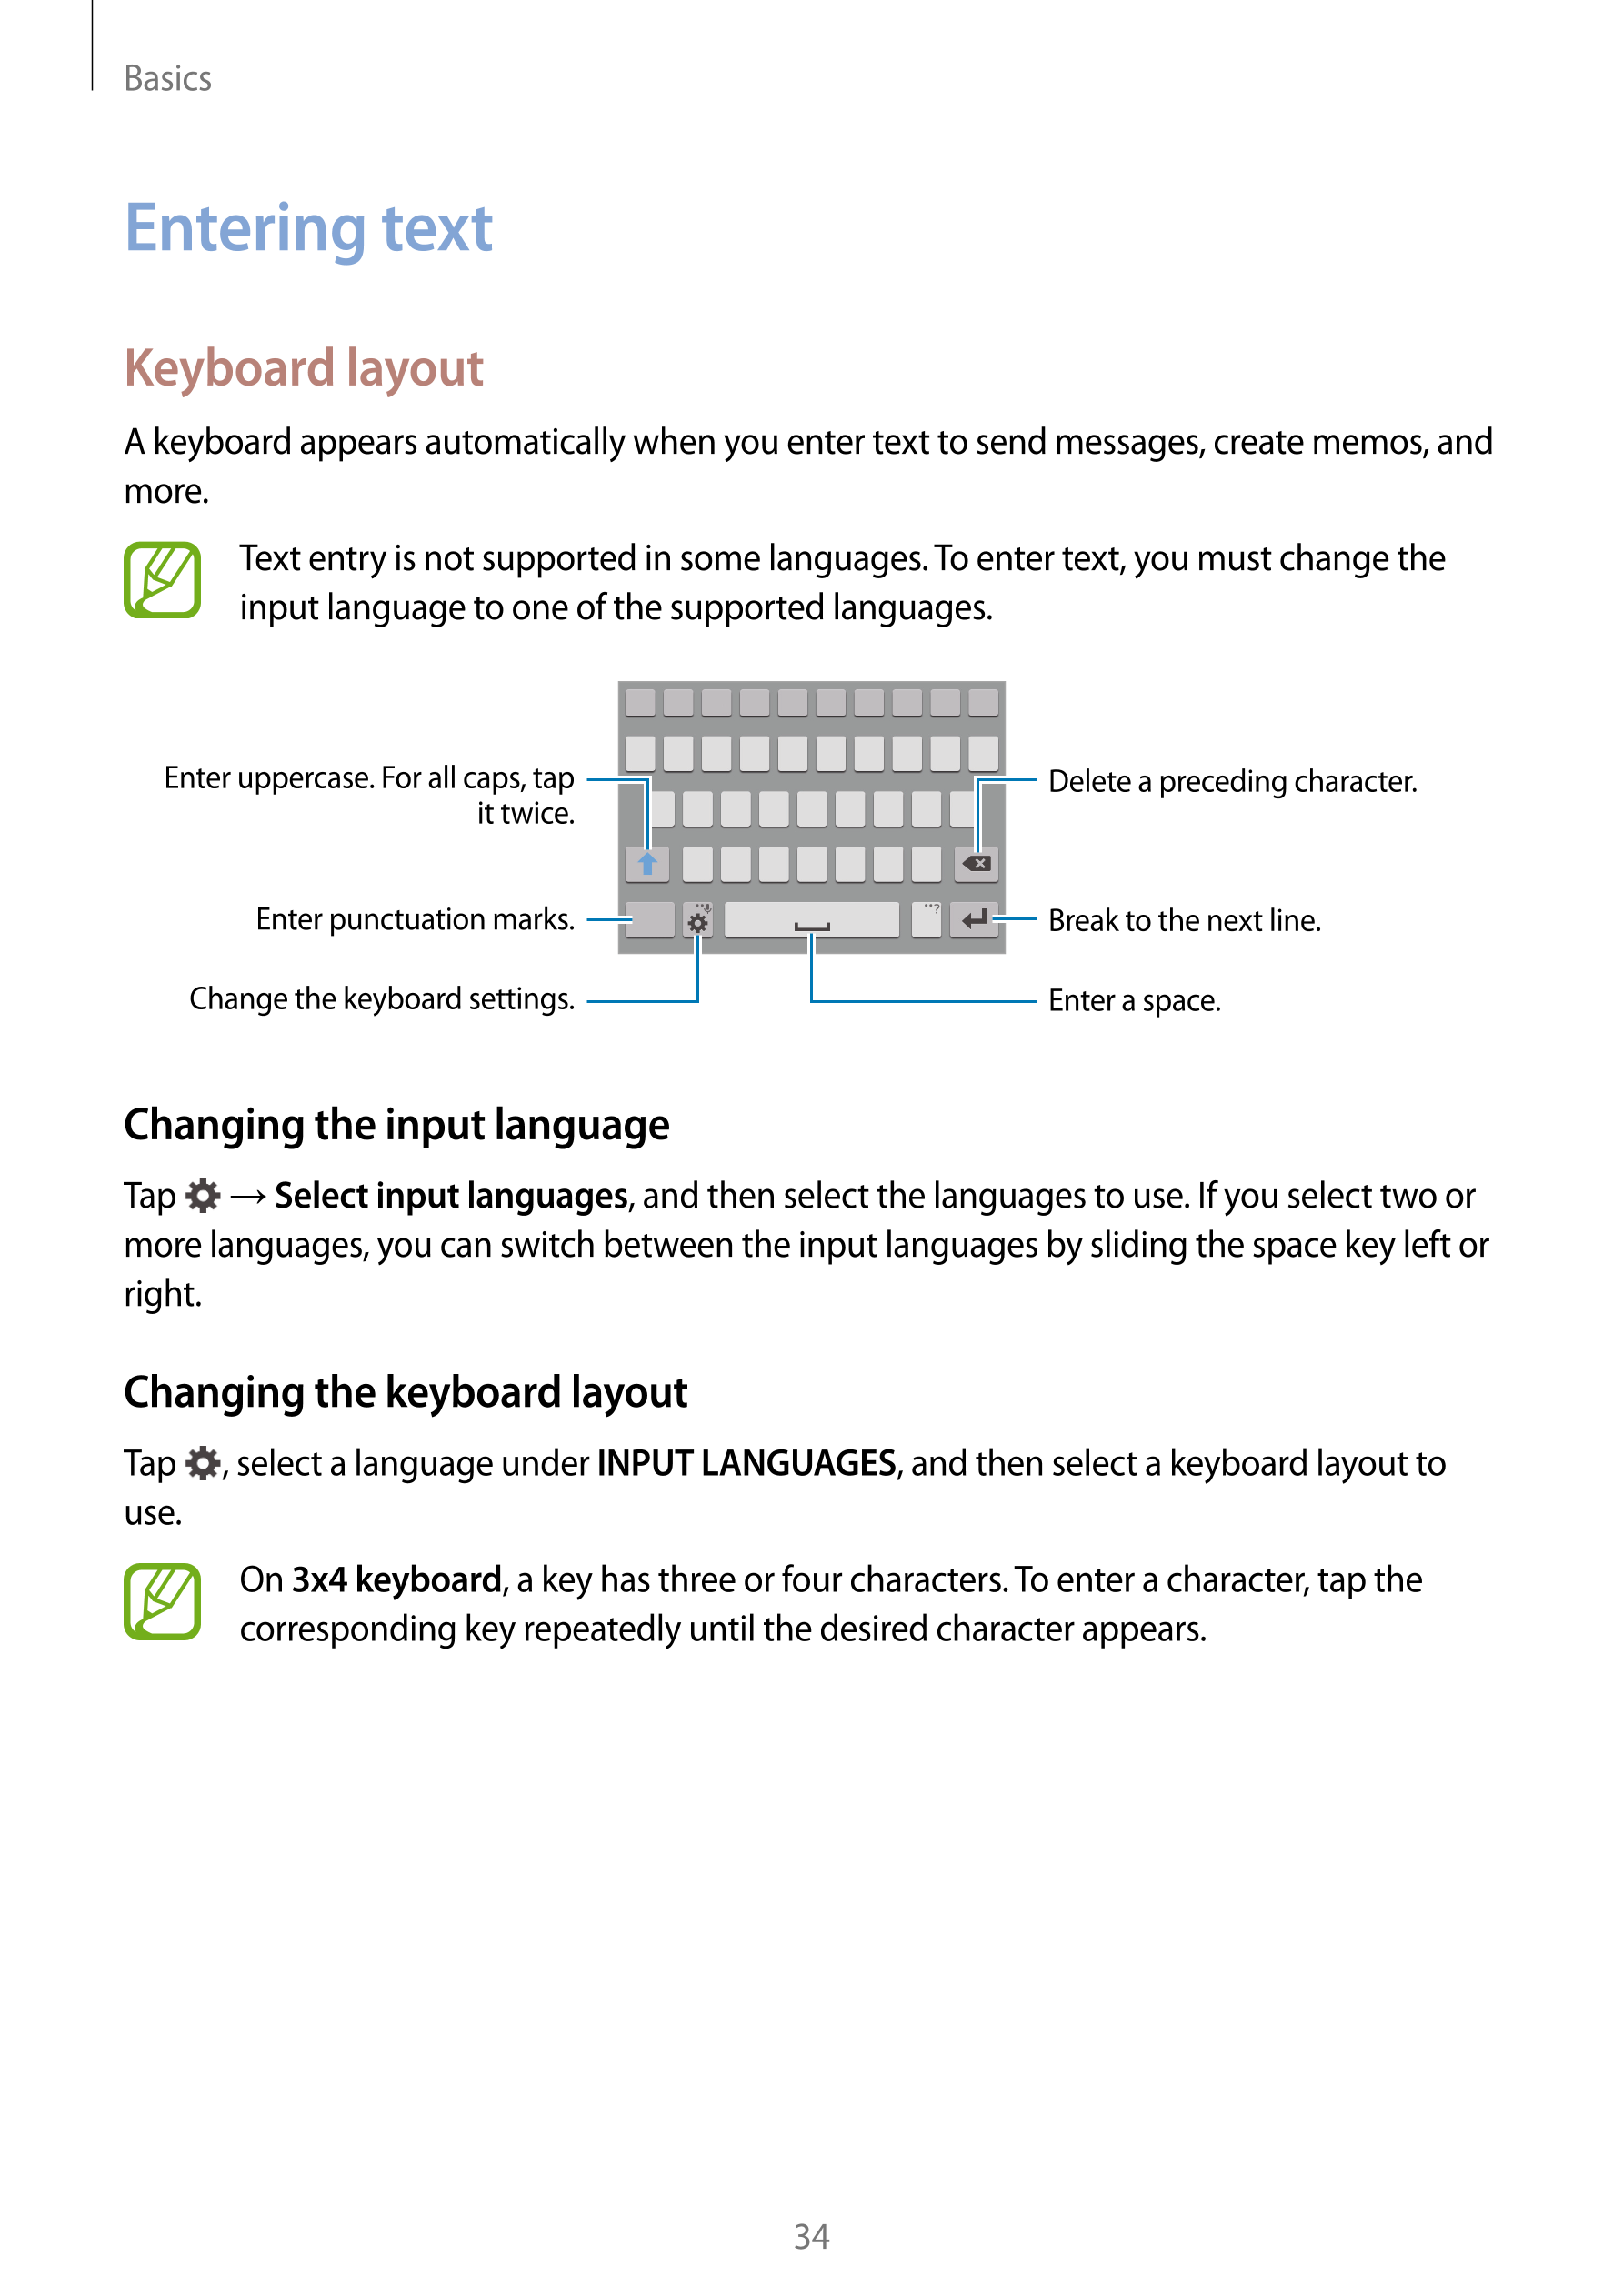 Basics
Entering text
Keyboard layout
A keyboard appears automatically when you enter text to send messages, create memos, and 
m